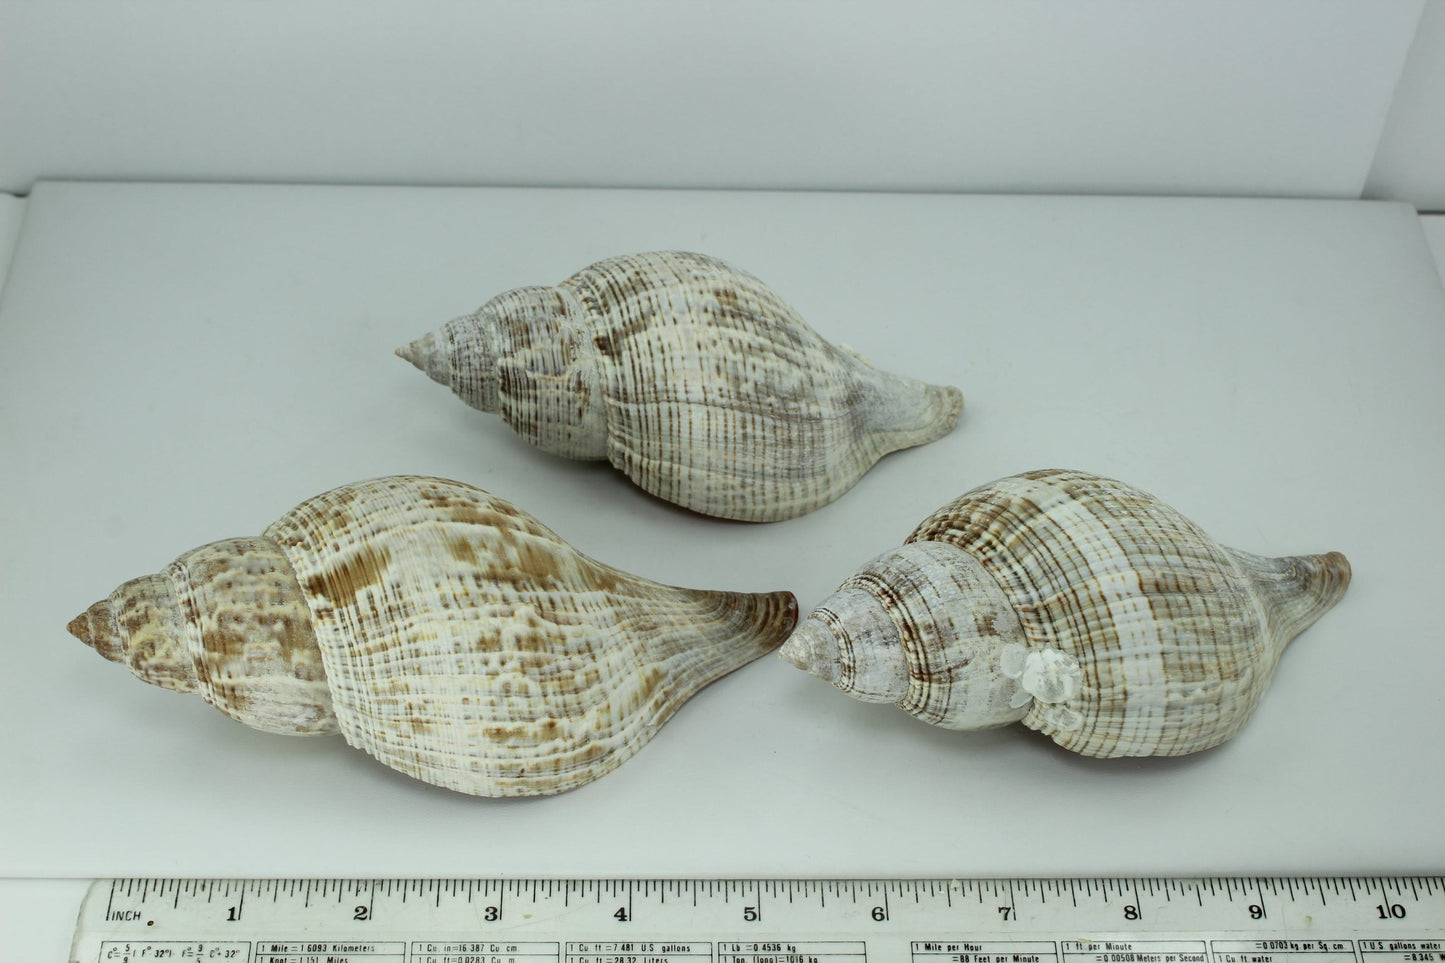 Florida Natural Shells 3 Large 5" Tulips Estate Collection Crafts Shell Art Collectibles rare